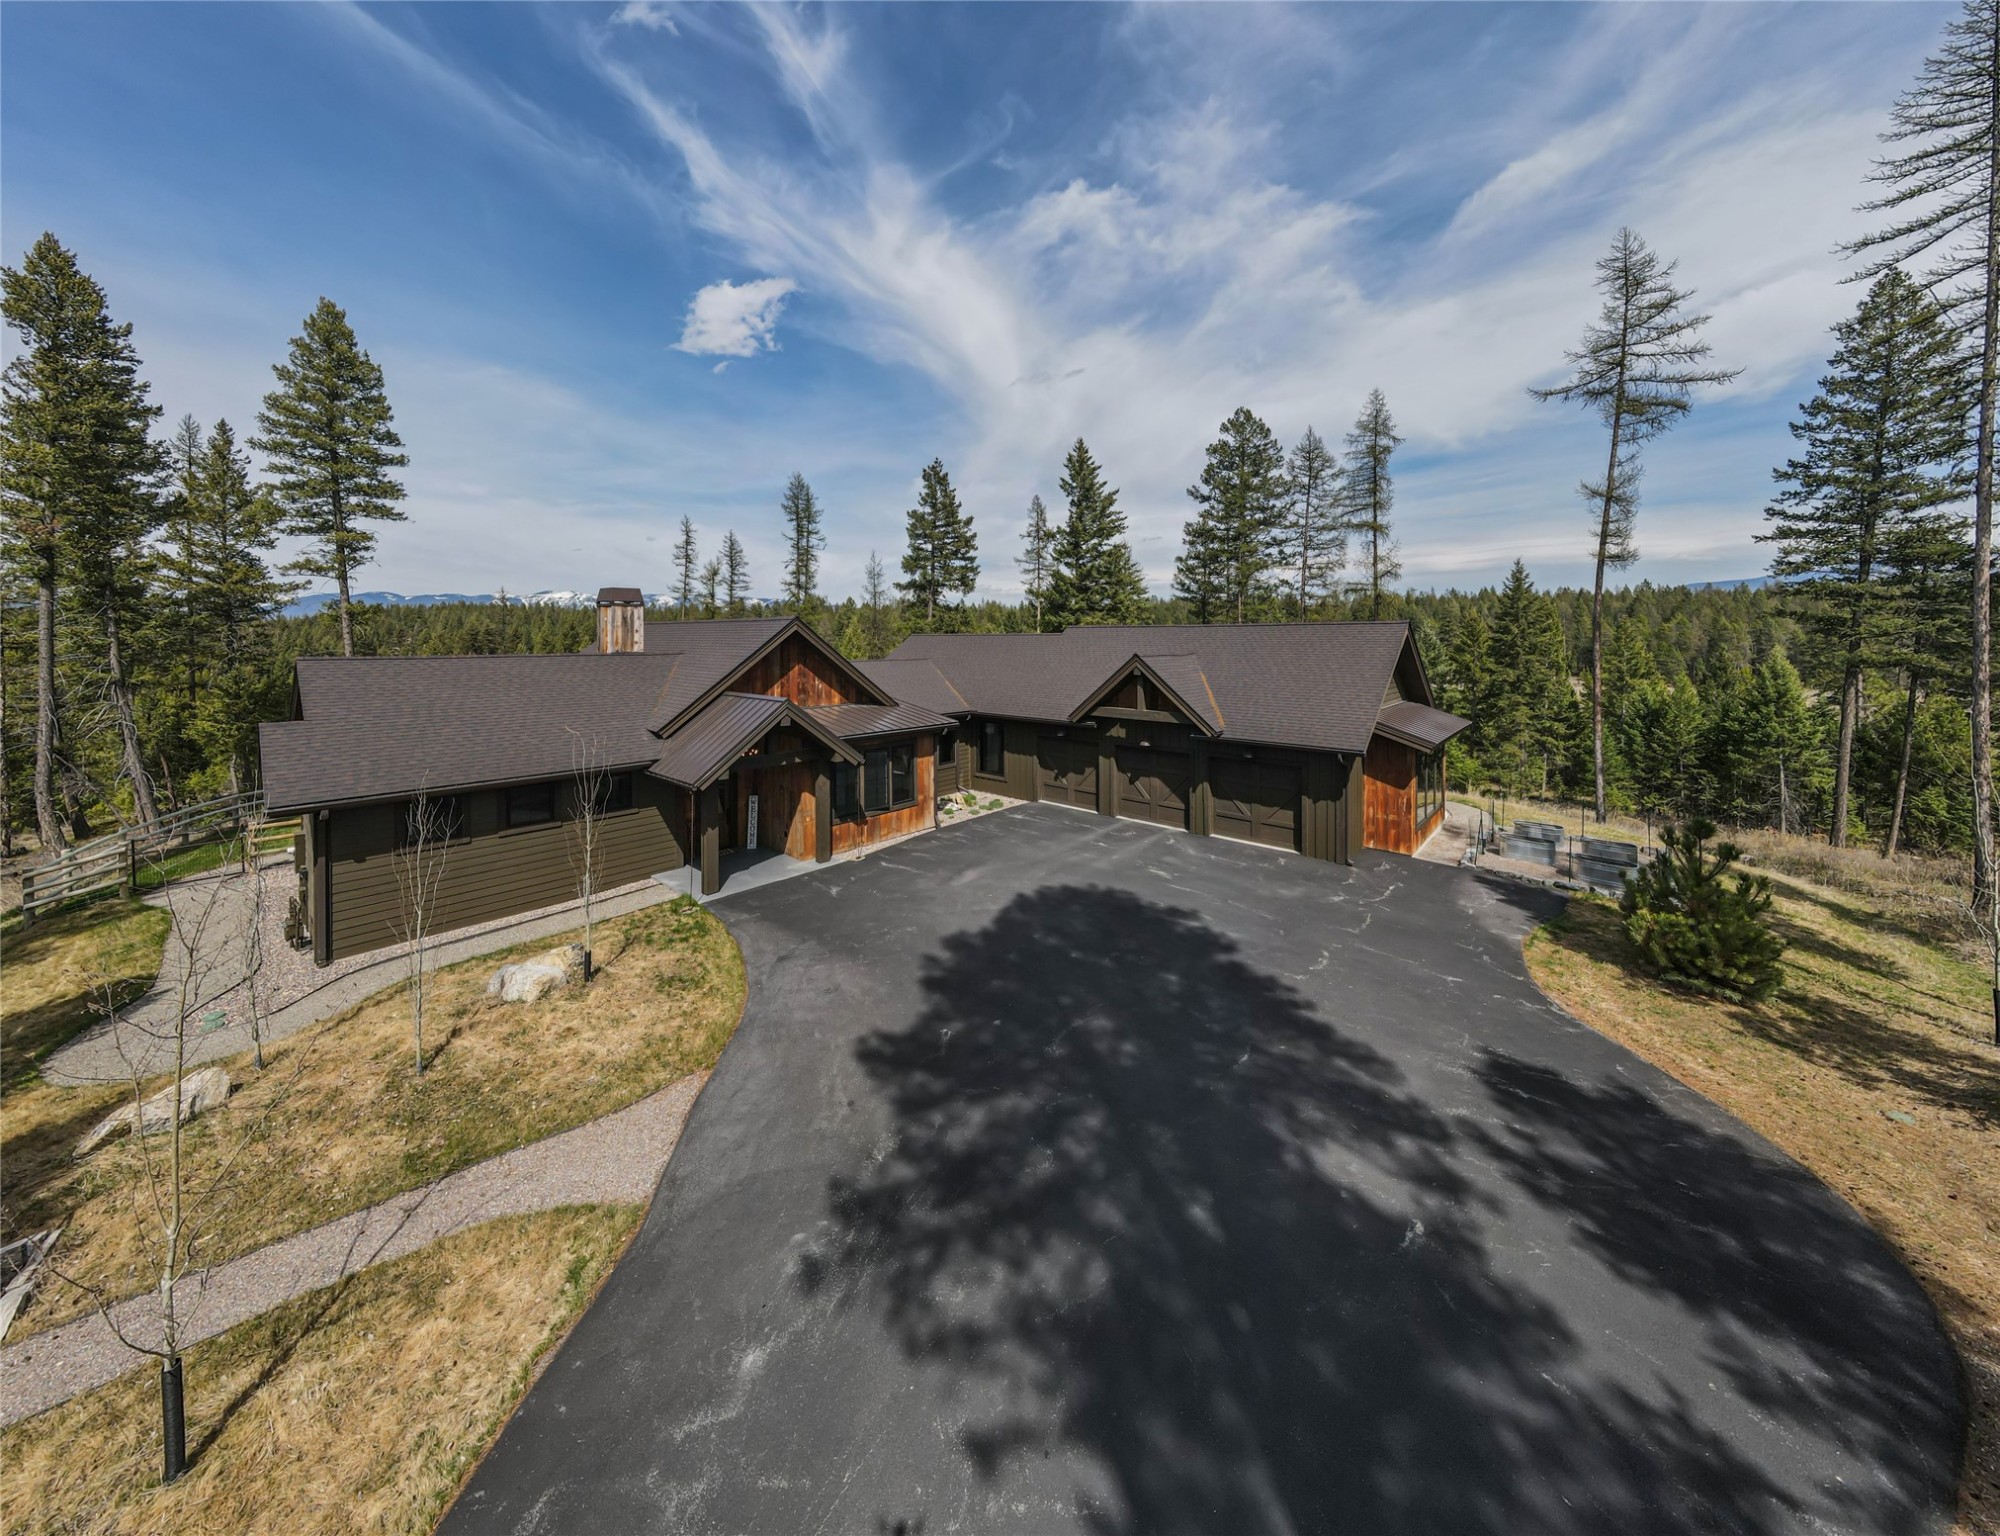 Discover your private haven in Whitefish, MT – a captivating 4-bed, 3-bath mountain modern farmhouse on 6.7 acres. With 2,755 SF of thoughtfully designed living space, you'll admire the 12' & 10' ceilings, wood floors, and a cozy wood fireplace in living room overlooking awe-inspiring mountain views. The gourmet kitchen, adorned with granite and quartz countertops, and a butler's pantry, is a culinary enthusiast's dream. The master suite boasts heated bathroom floors, large walk-in closet, and floor-to-ceiling glass, with sliding doors leading to an outdoor patio. Additional dual master suite is perfect for guests. Outside, the fenced backyard, fire pit, heated outdoor patio, and built in BBQ kitchenette invite you to embrace Montana's outdoor lifestyle. The 3-car heated garage ensures both storage and convenience, home also has a fenced garden area. Set against a backdrop of breathtaking natural beauty, this property isn't just a home – it's a retreat from the ordinary!